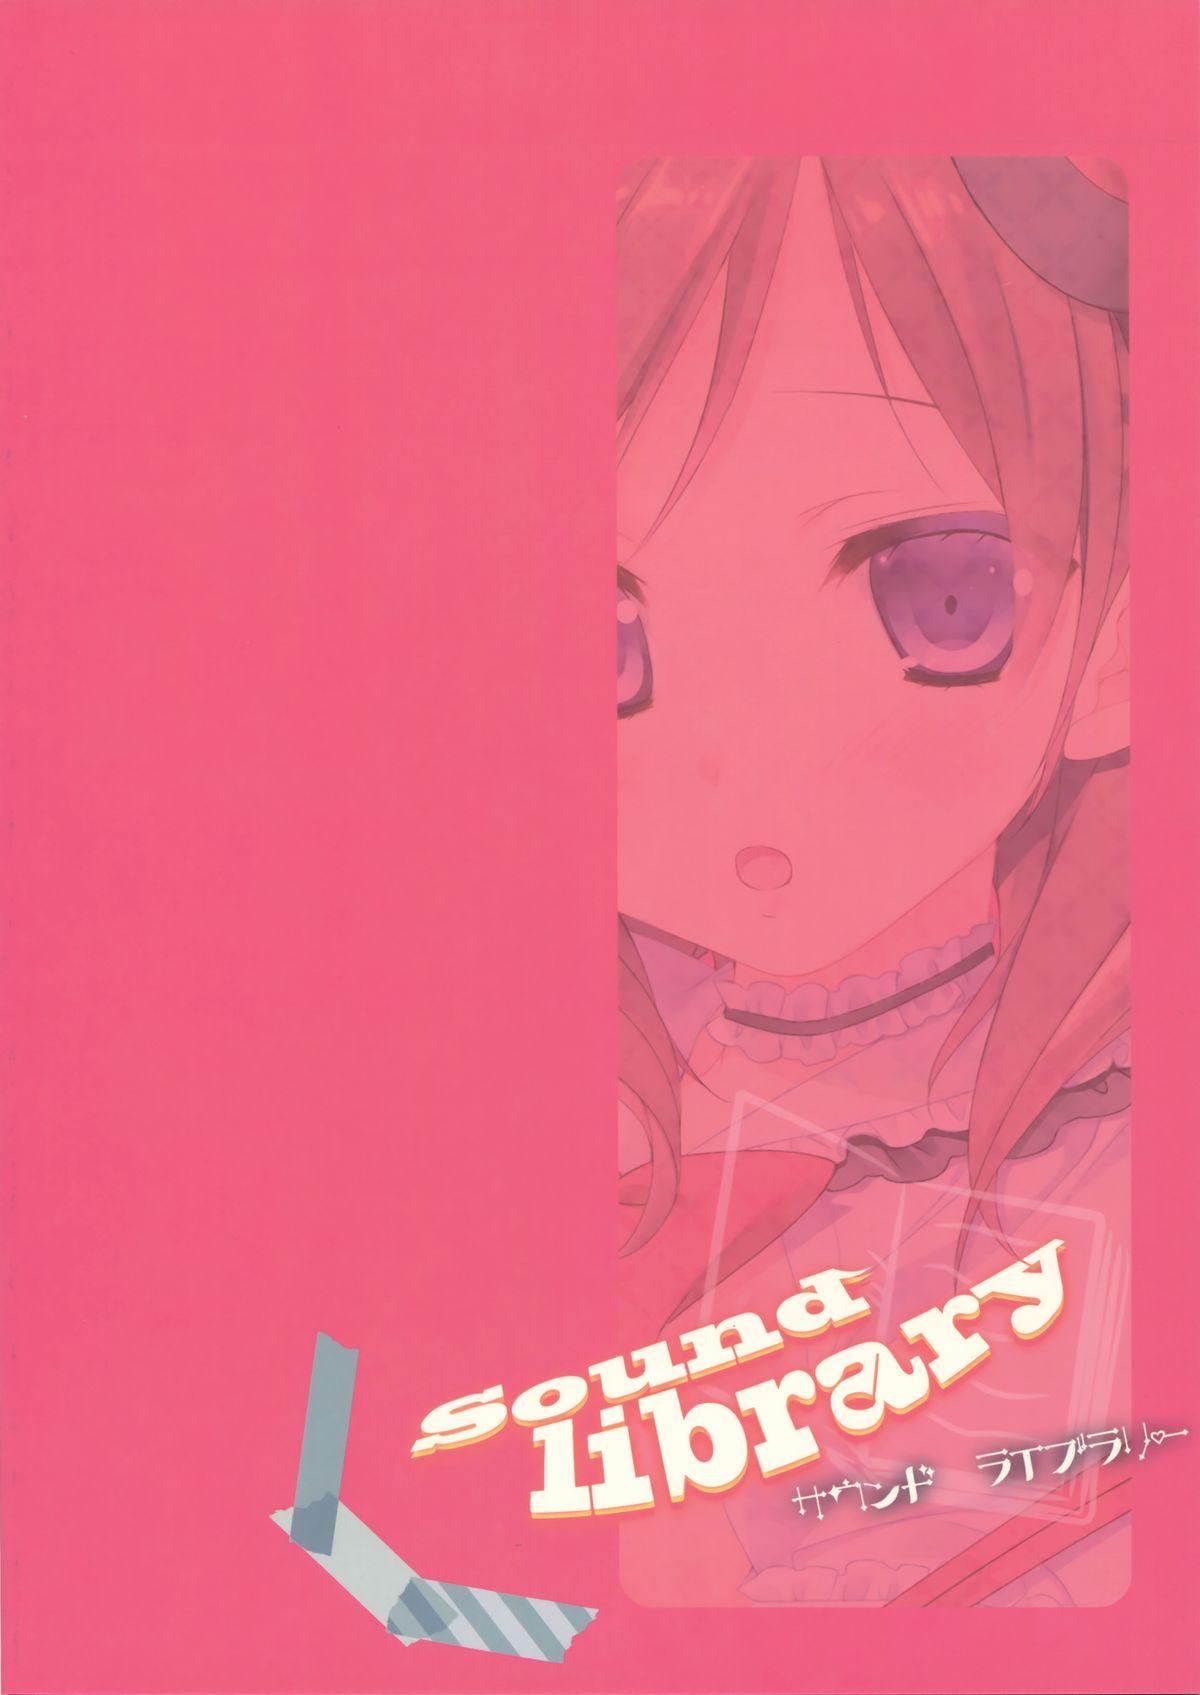 This Sound Library - Love live Tiny - Page 17